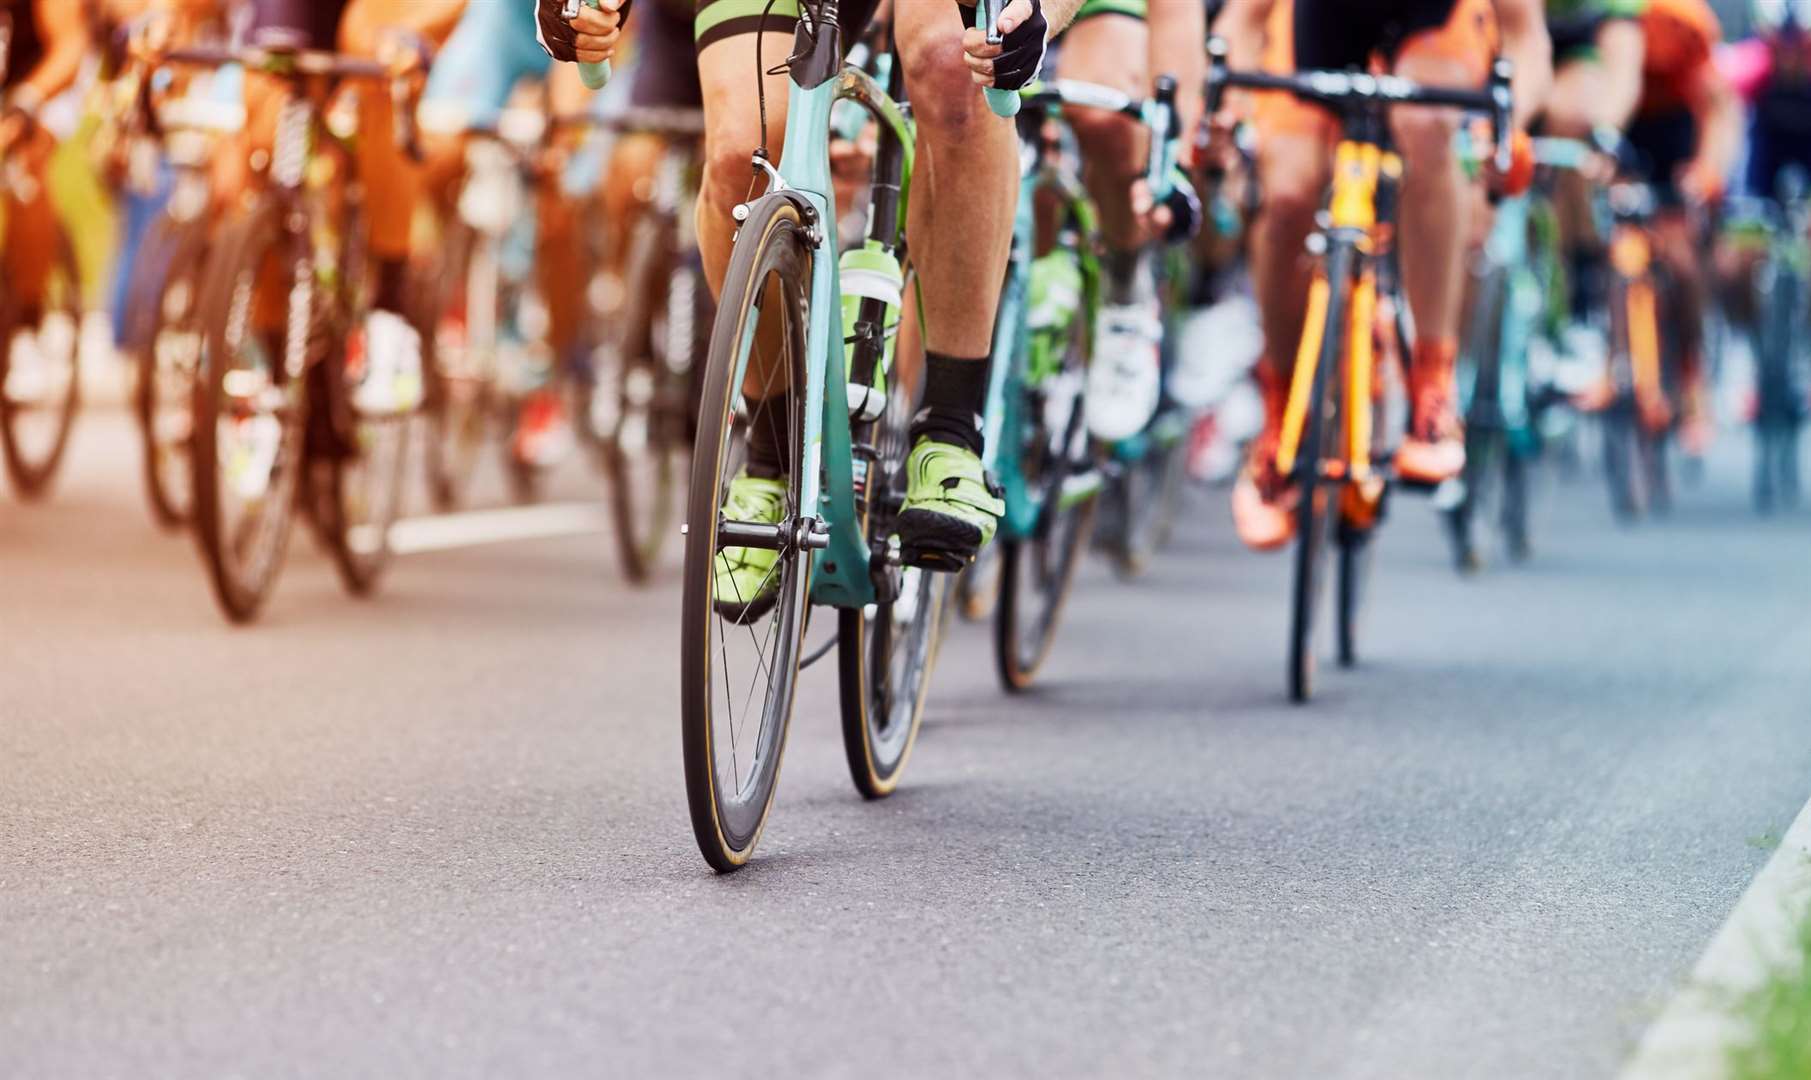 Cycling will take centre stage in Rochester next month